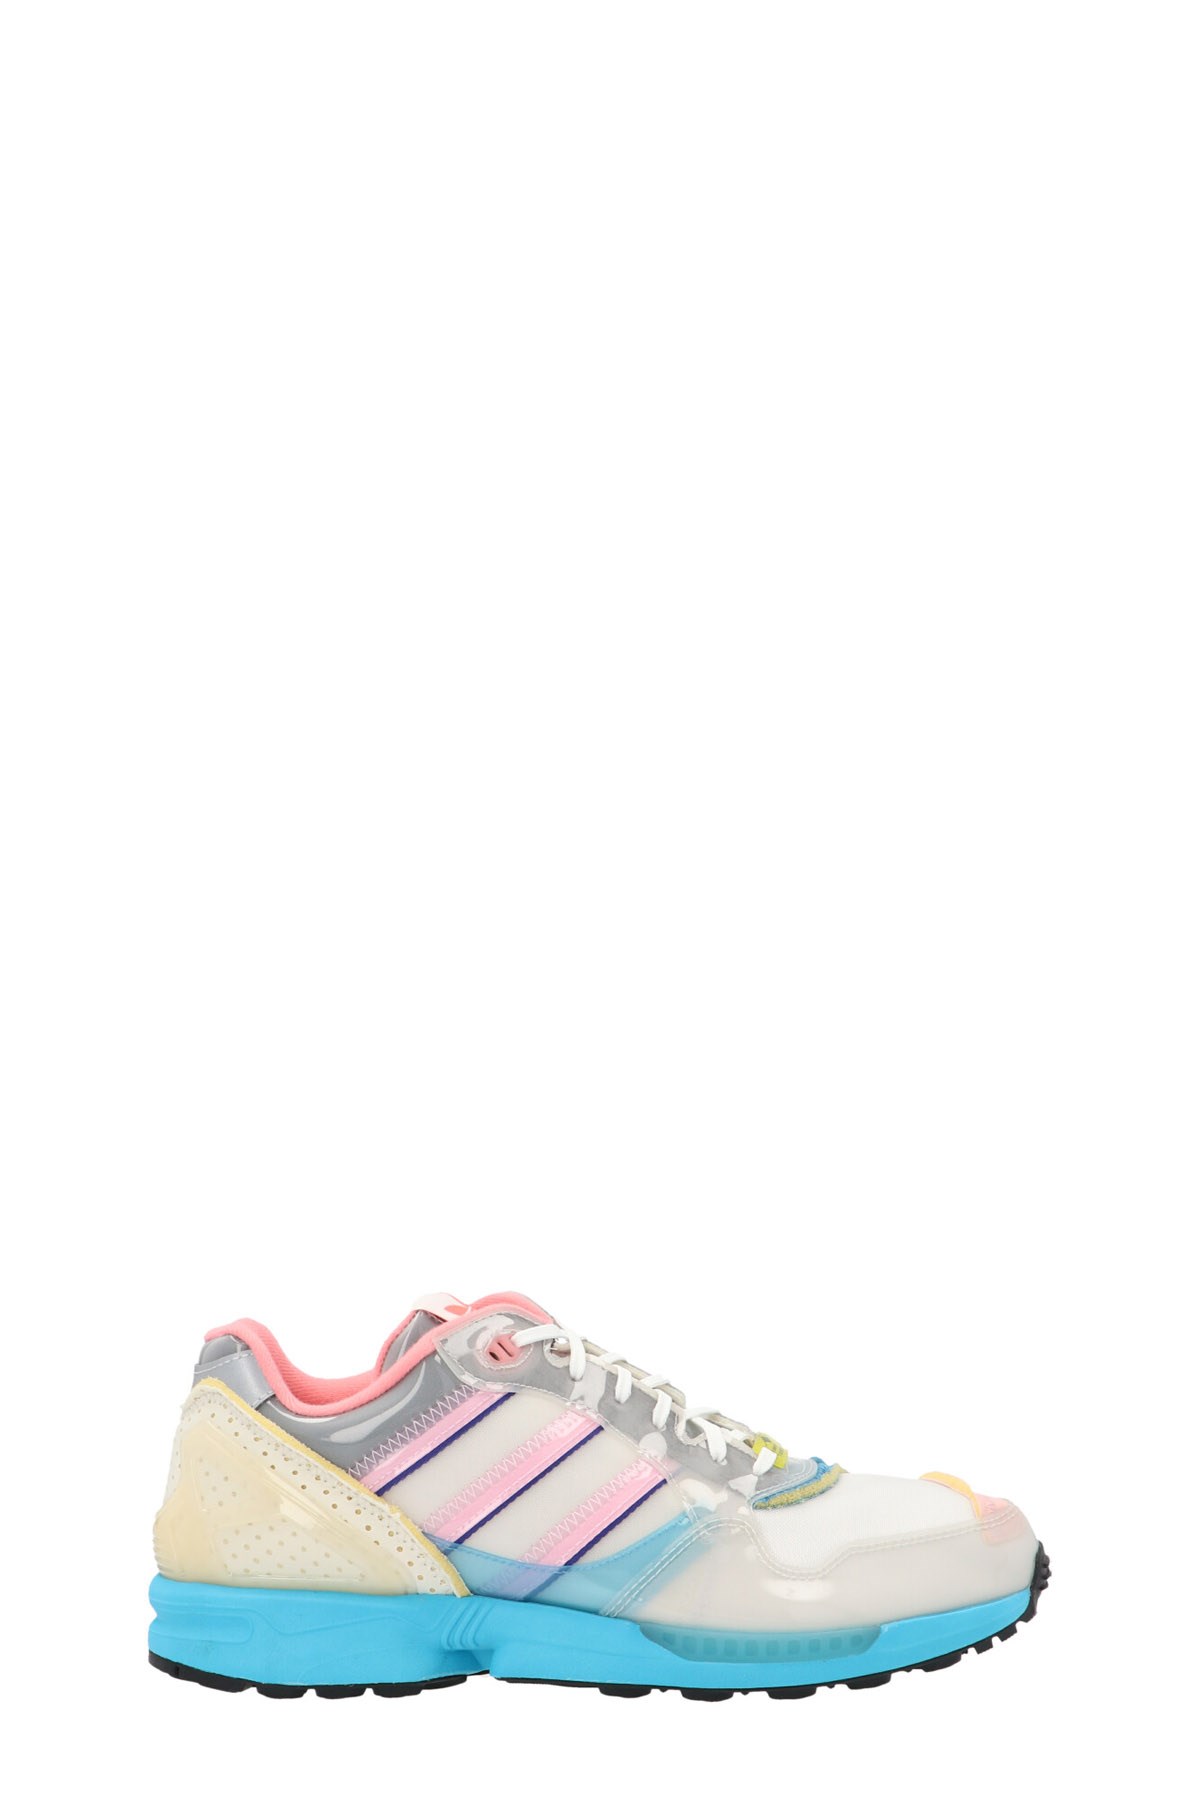 ADIDAS STATEMENT Xz 0006 Inside Out' Capsule Energy Pack Sneakers